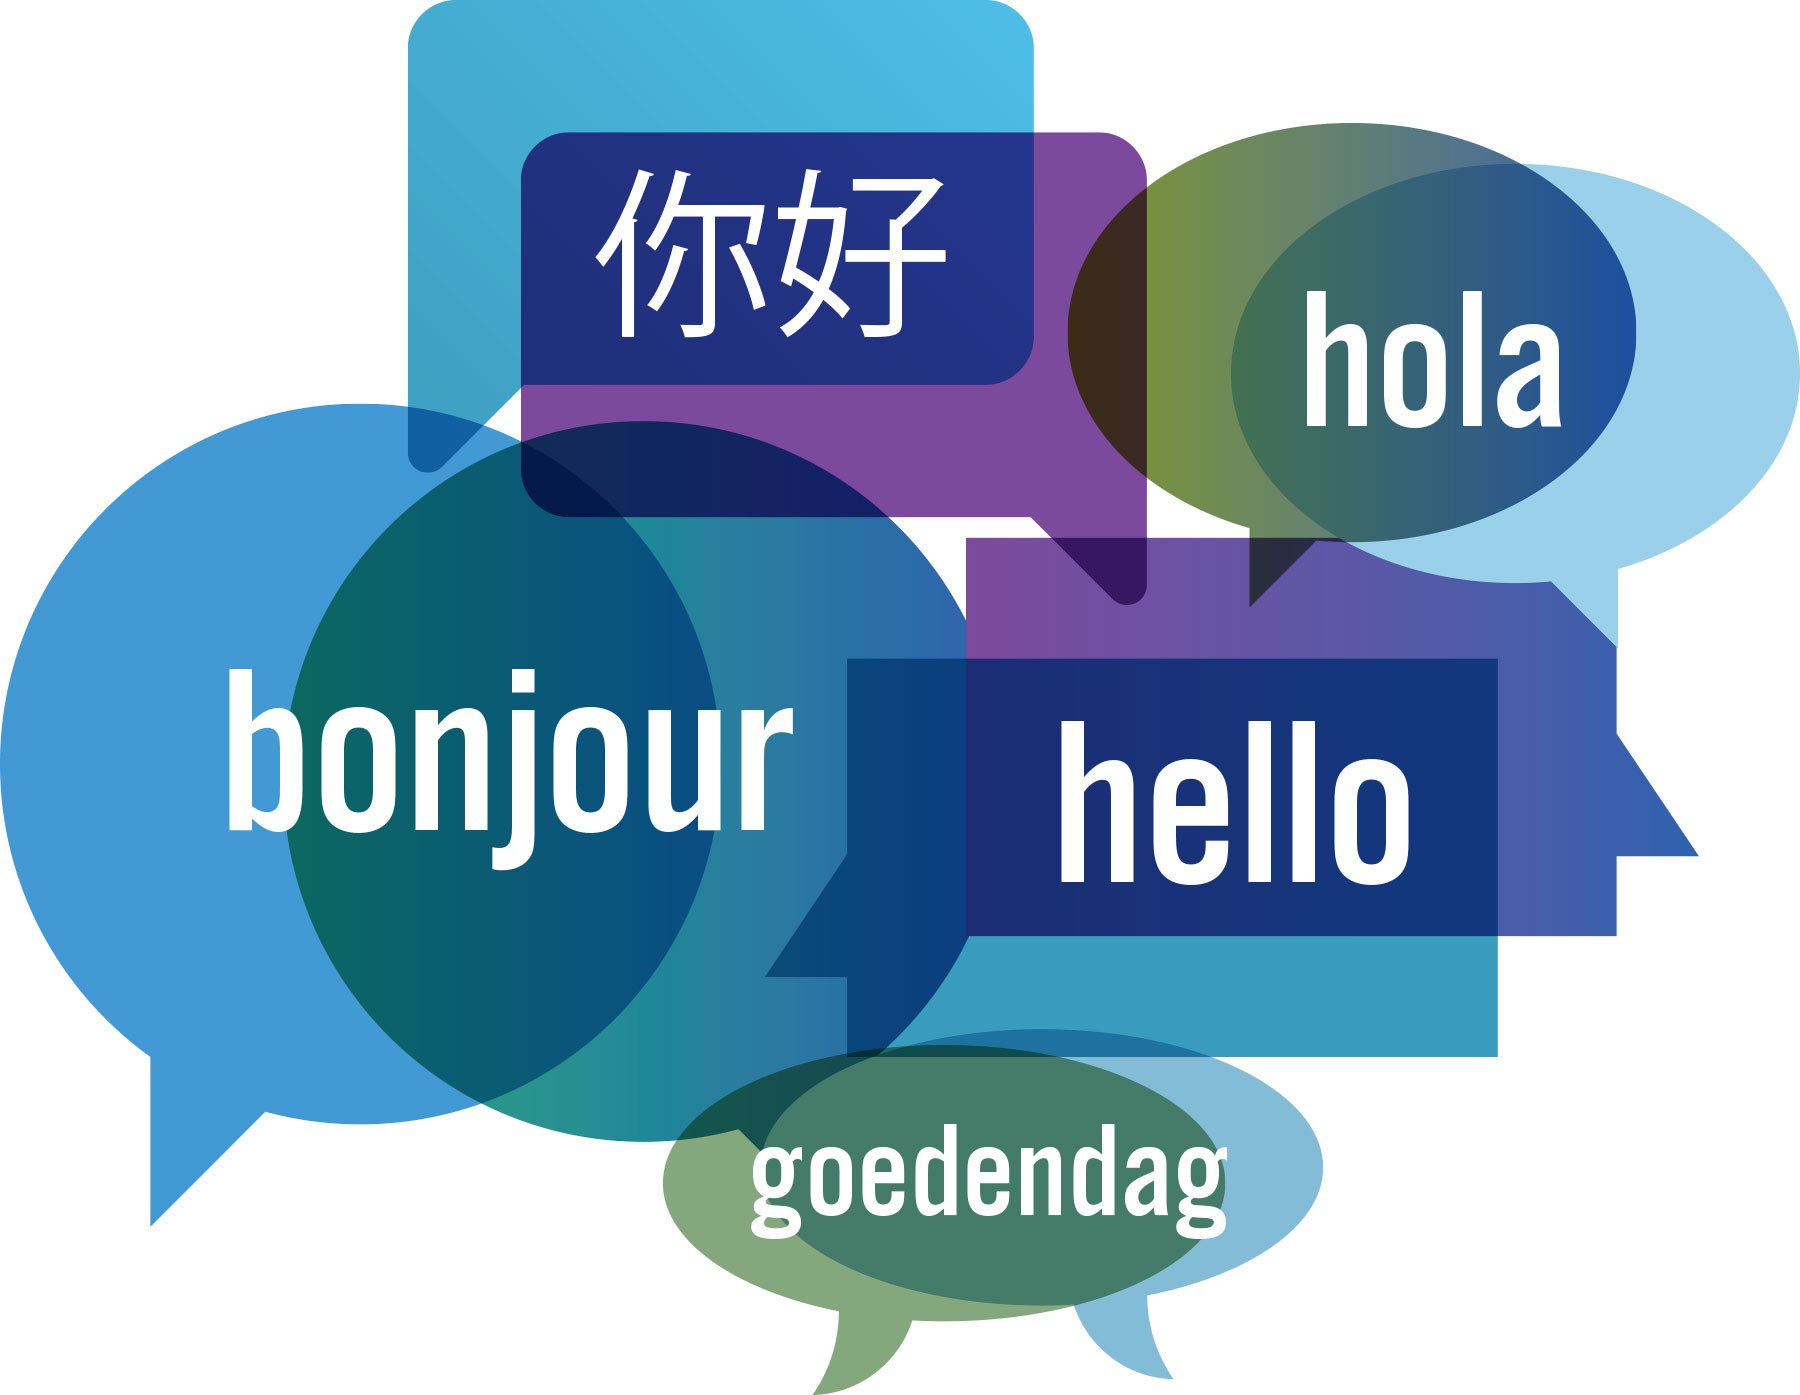 A graphic displaying words for "hello" in various languages.